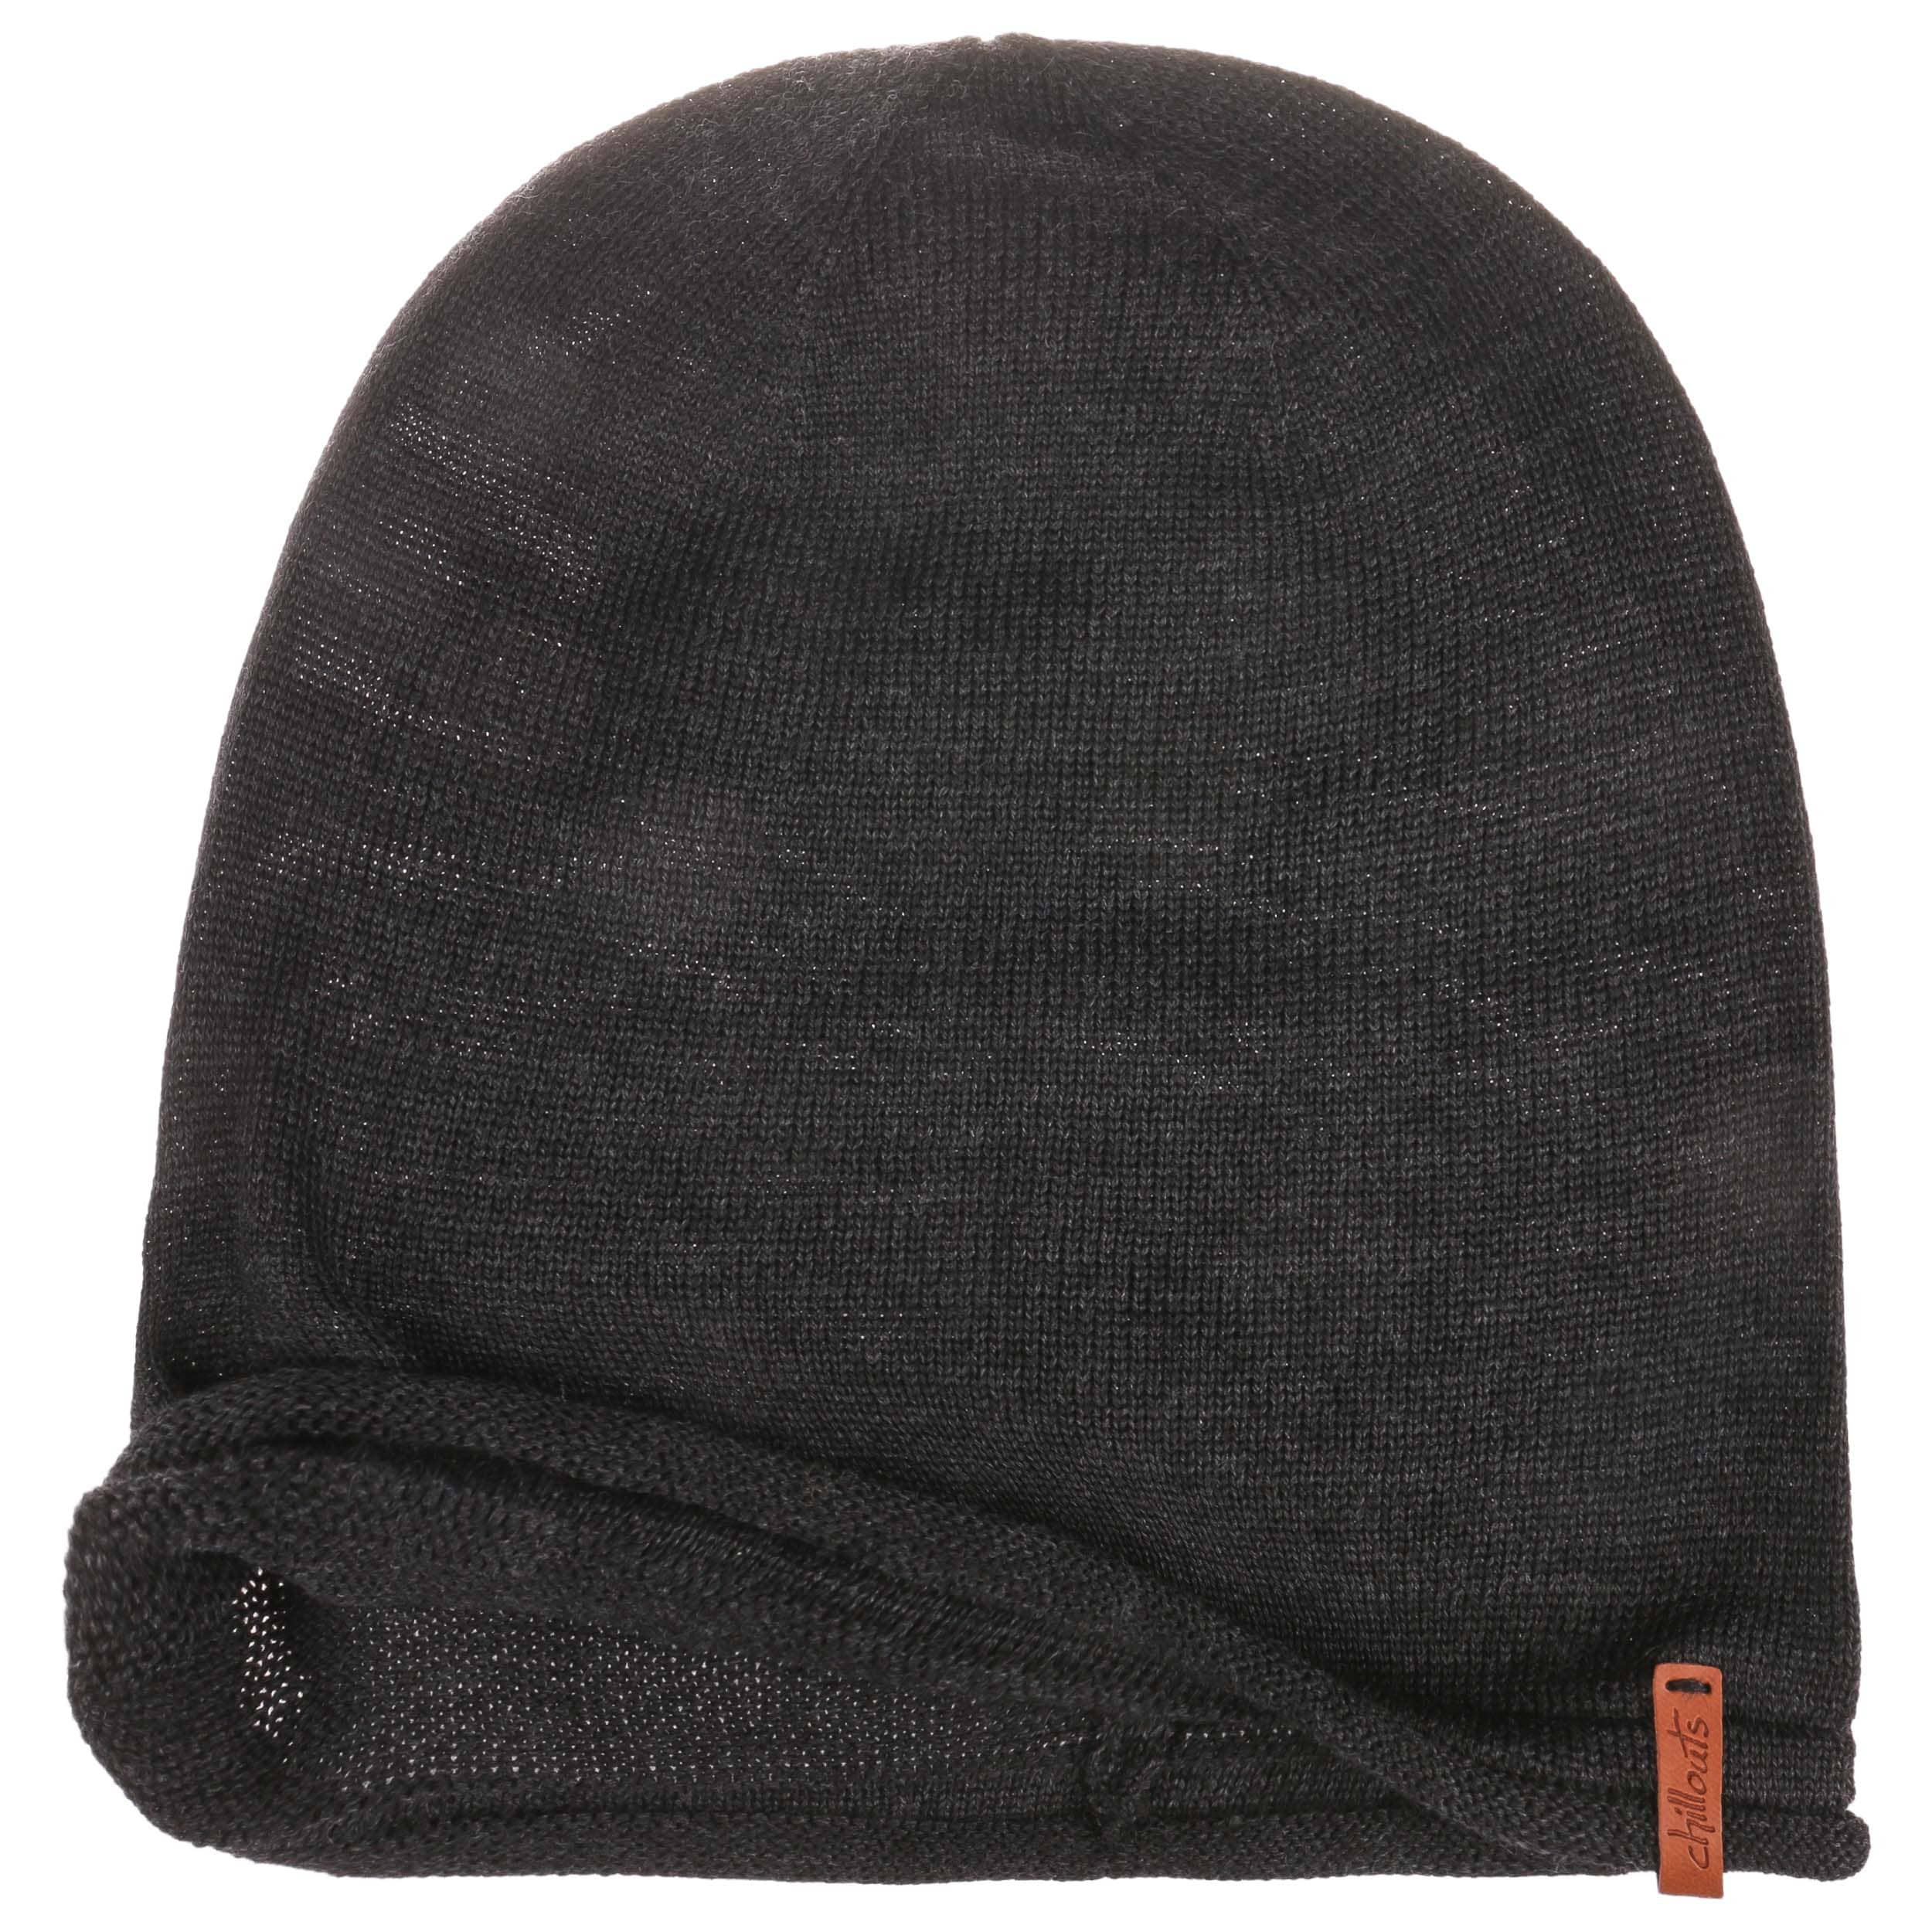 by Oversize - Chillouts Beanie 29,95 Leicester €